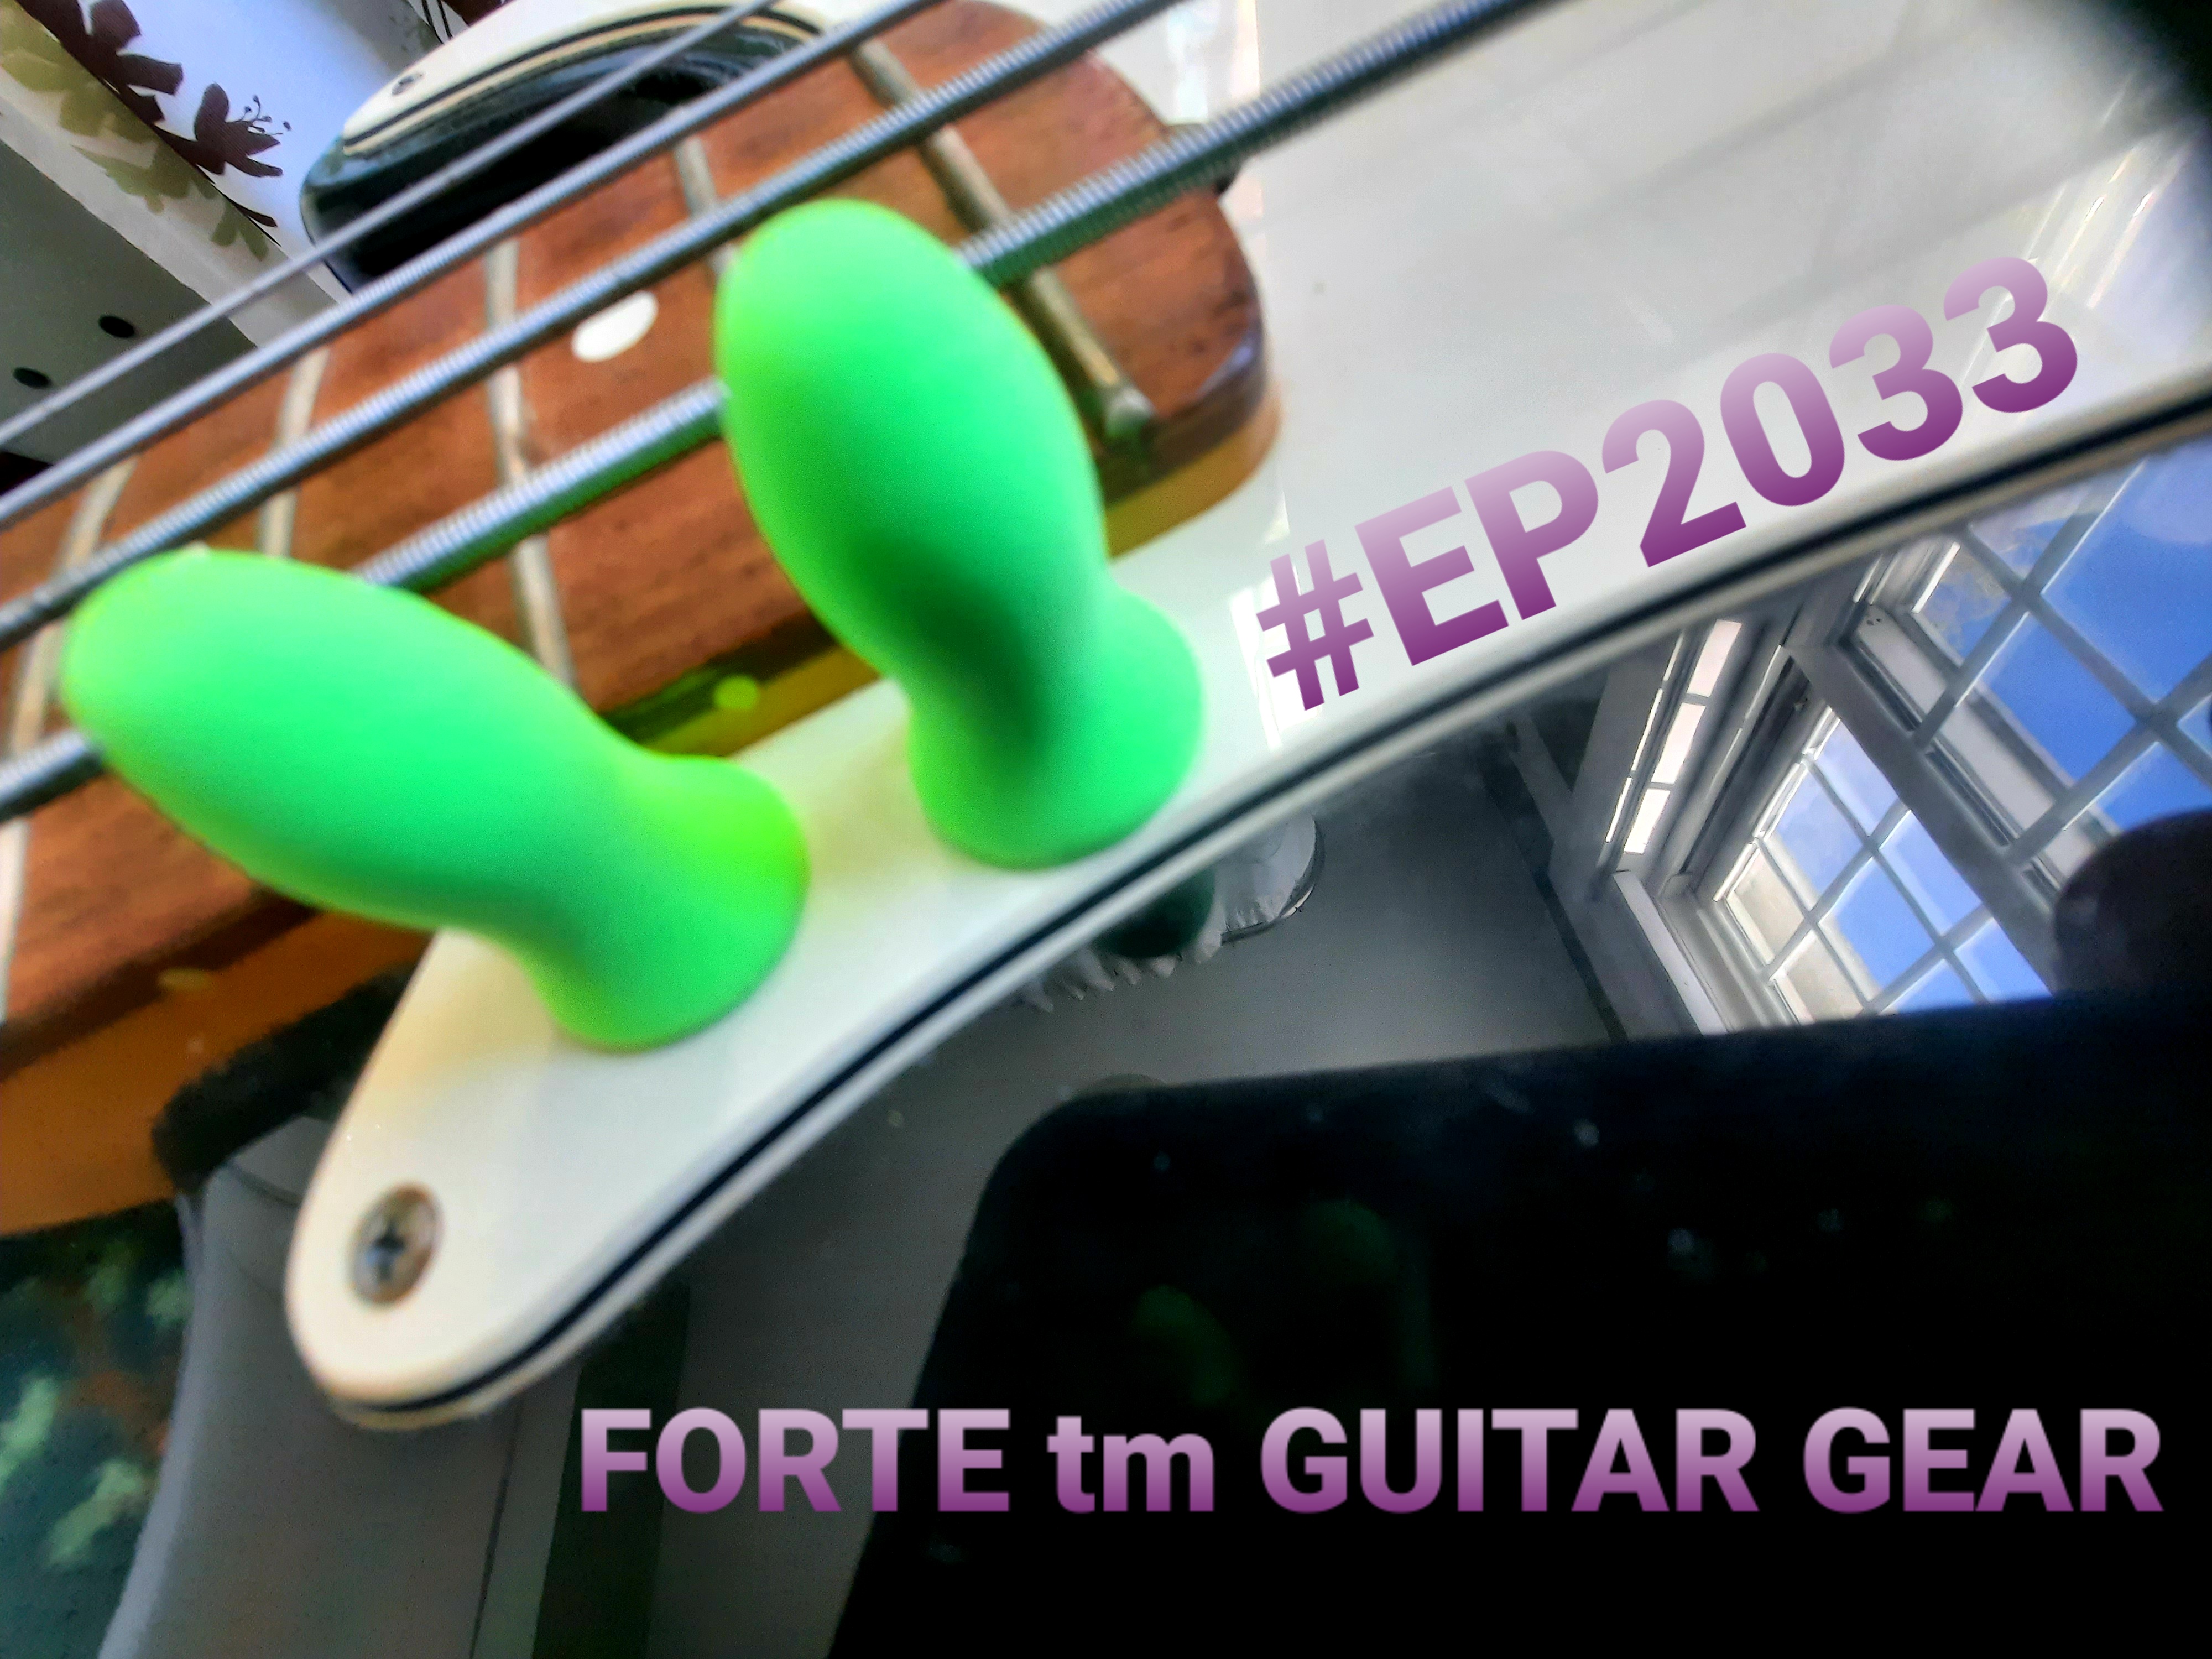 FORTE GUITAR GEAR tm #EP2033 FROM POLLY PRODUCTS: MADE IN THE USA 